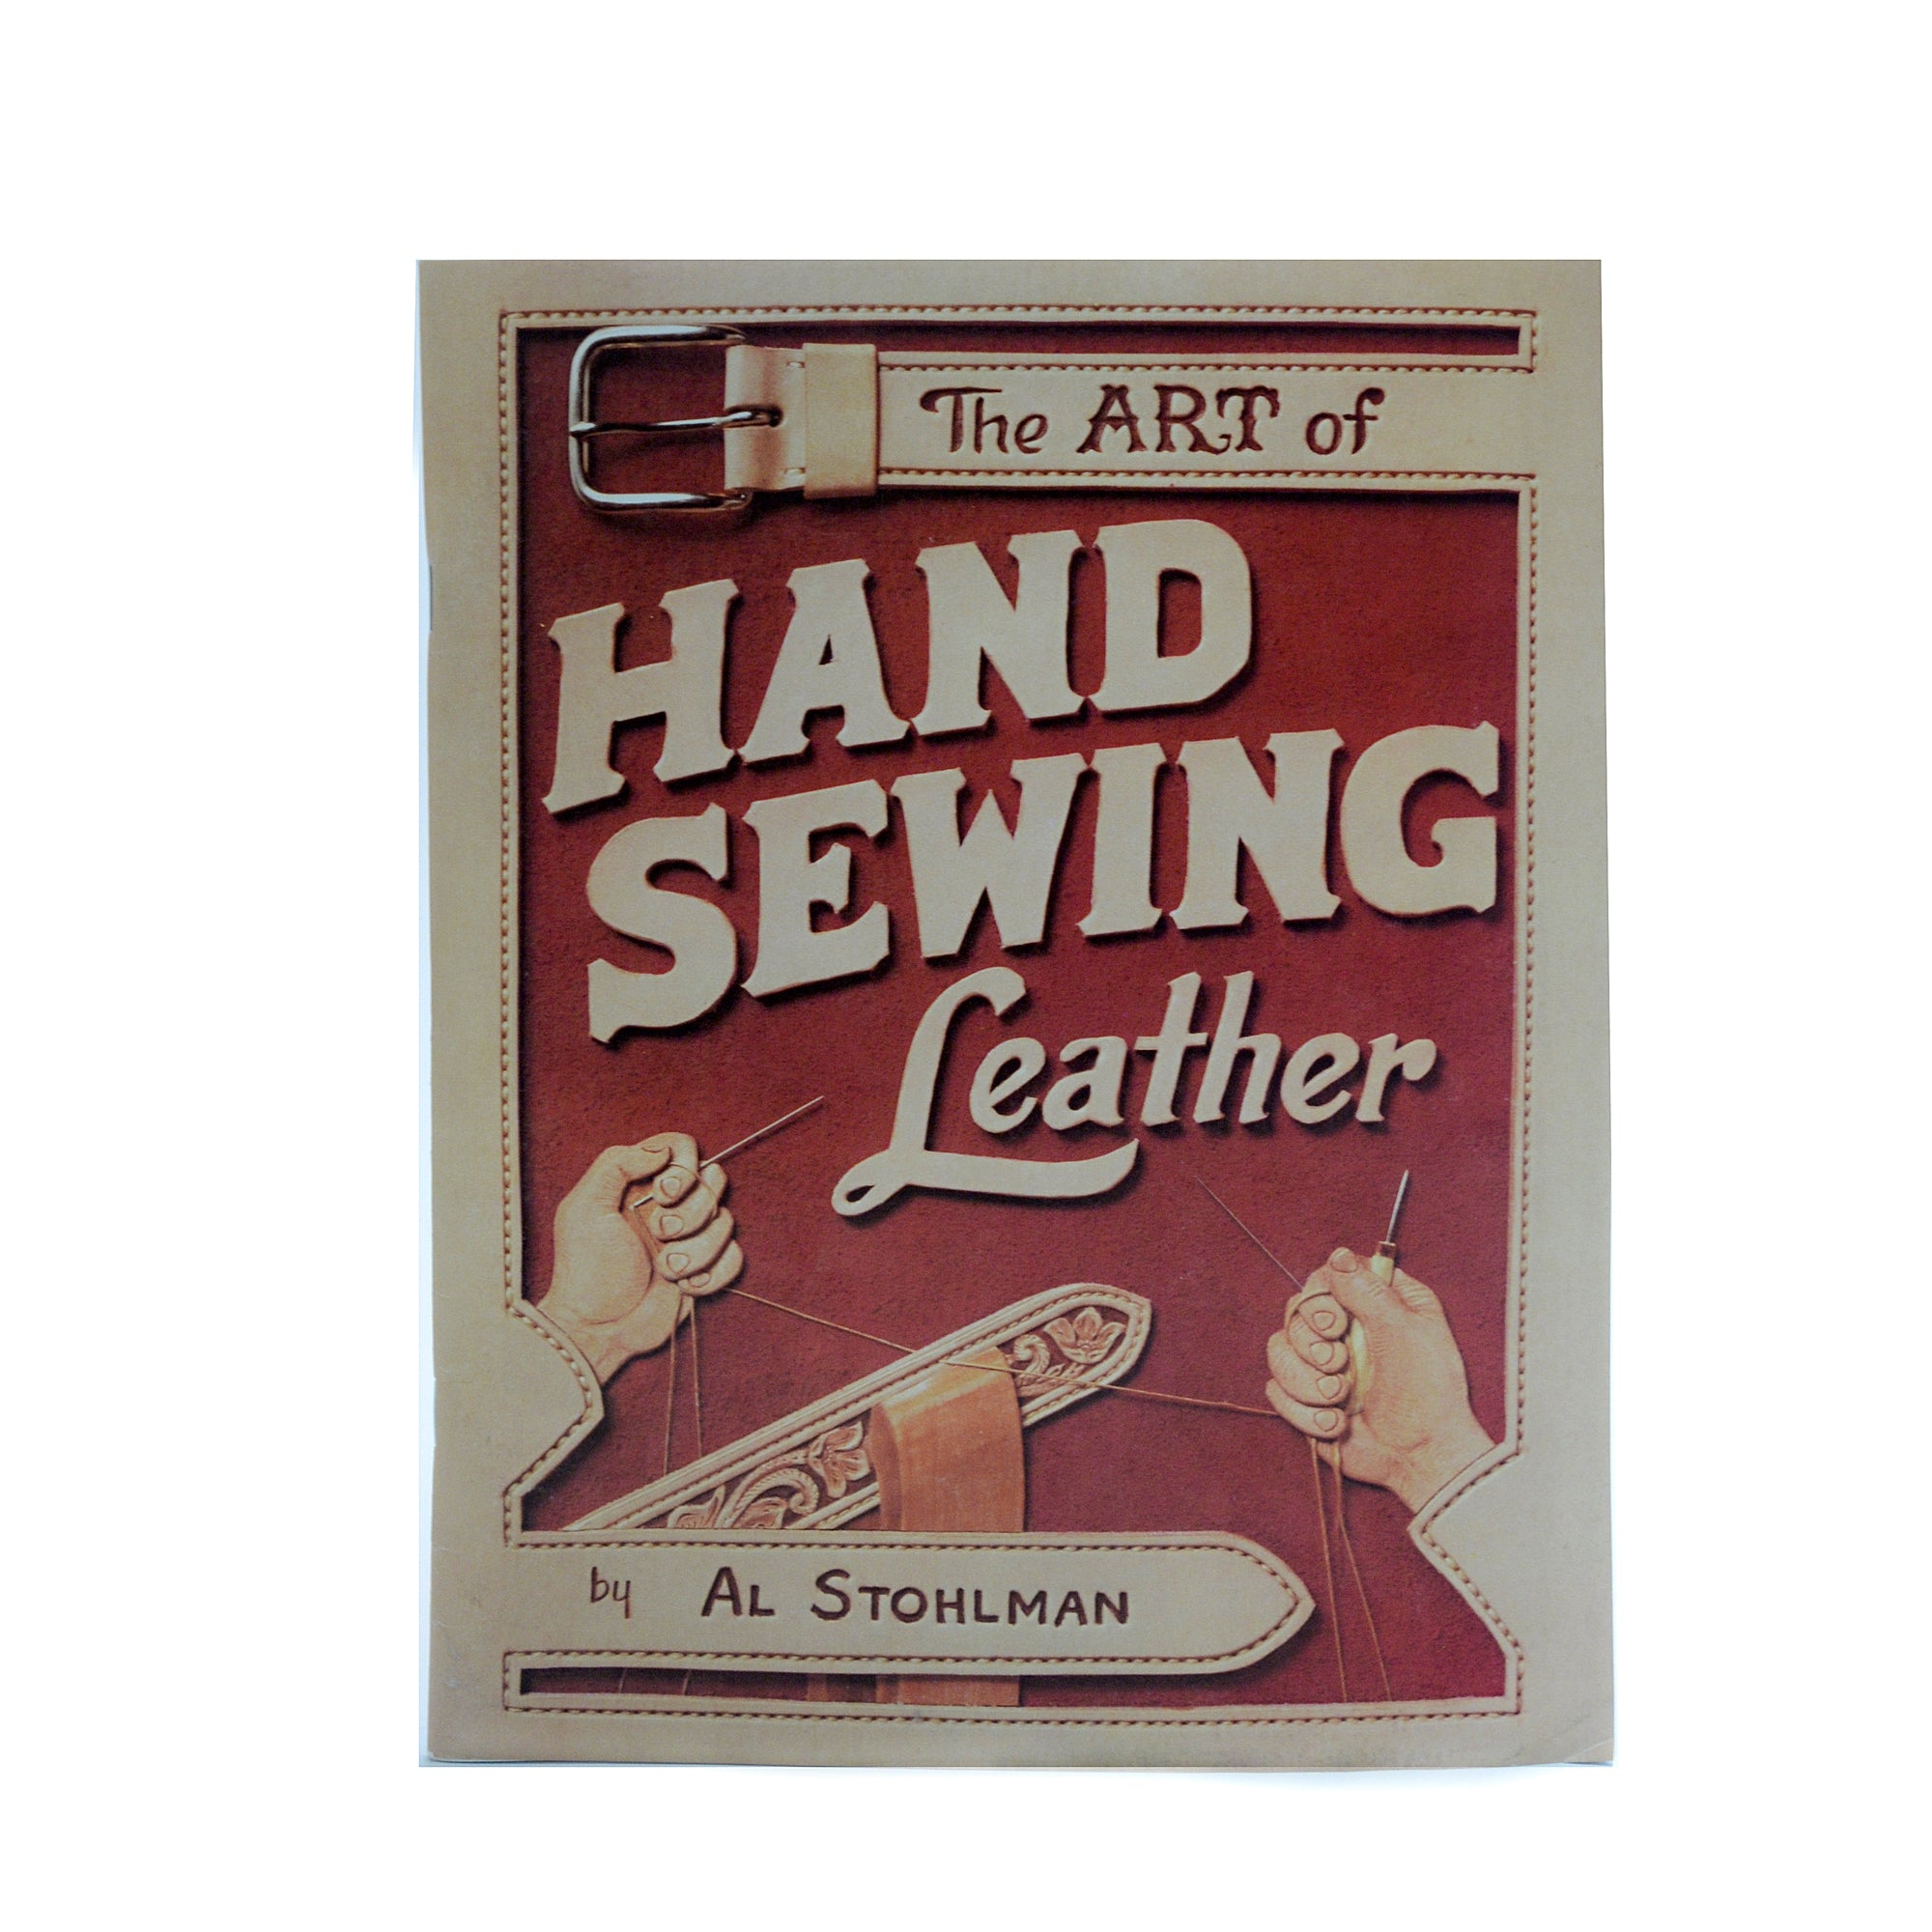 The Art of Hand Sewing Leather by Al Stohlman from Identity Leathercraft